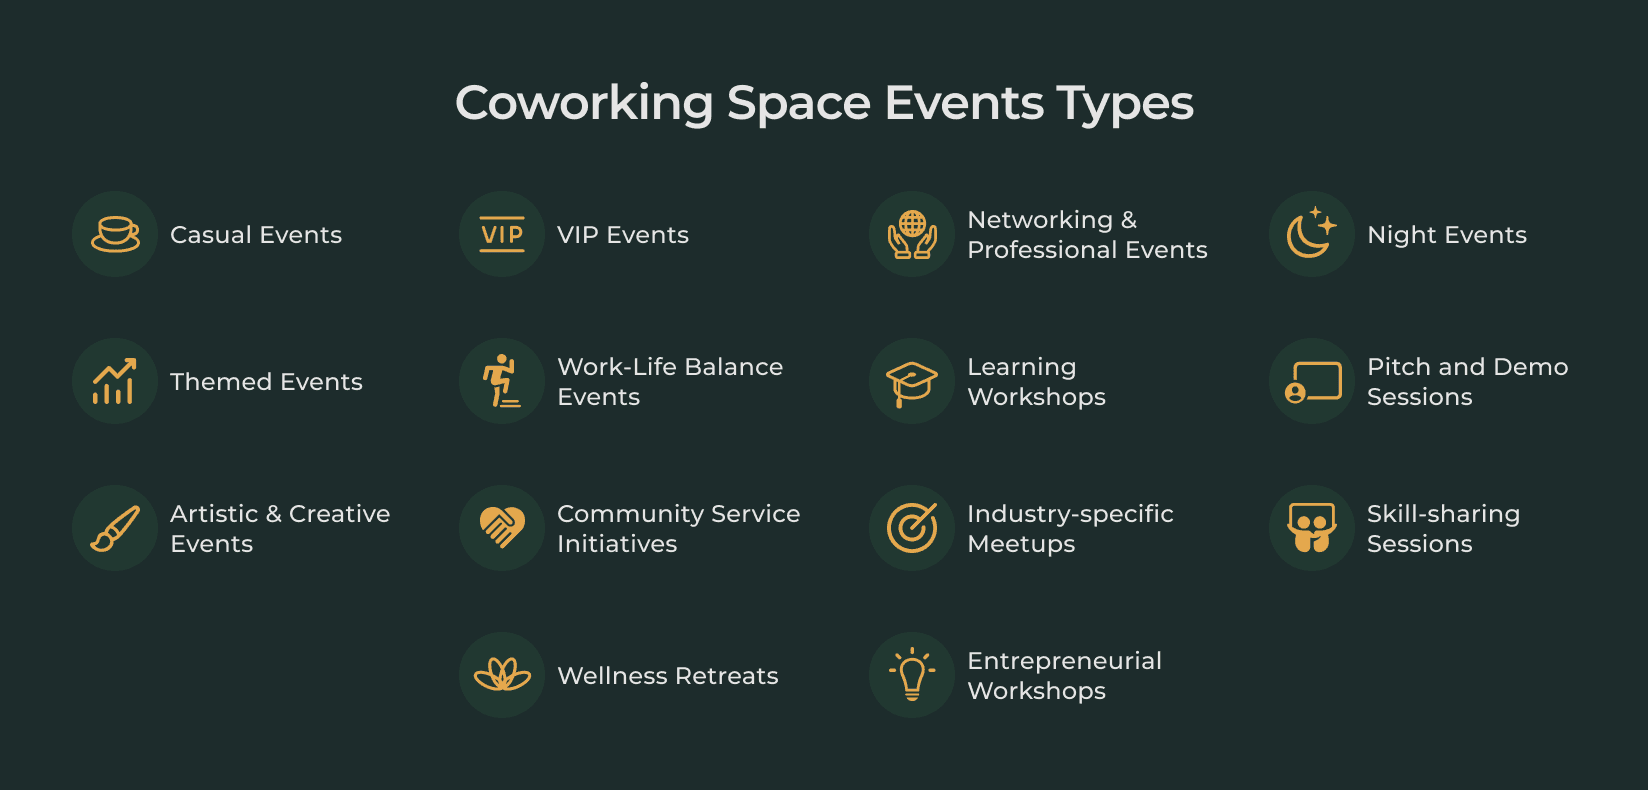 Types of coworking space events